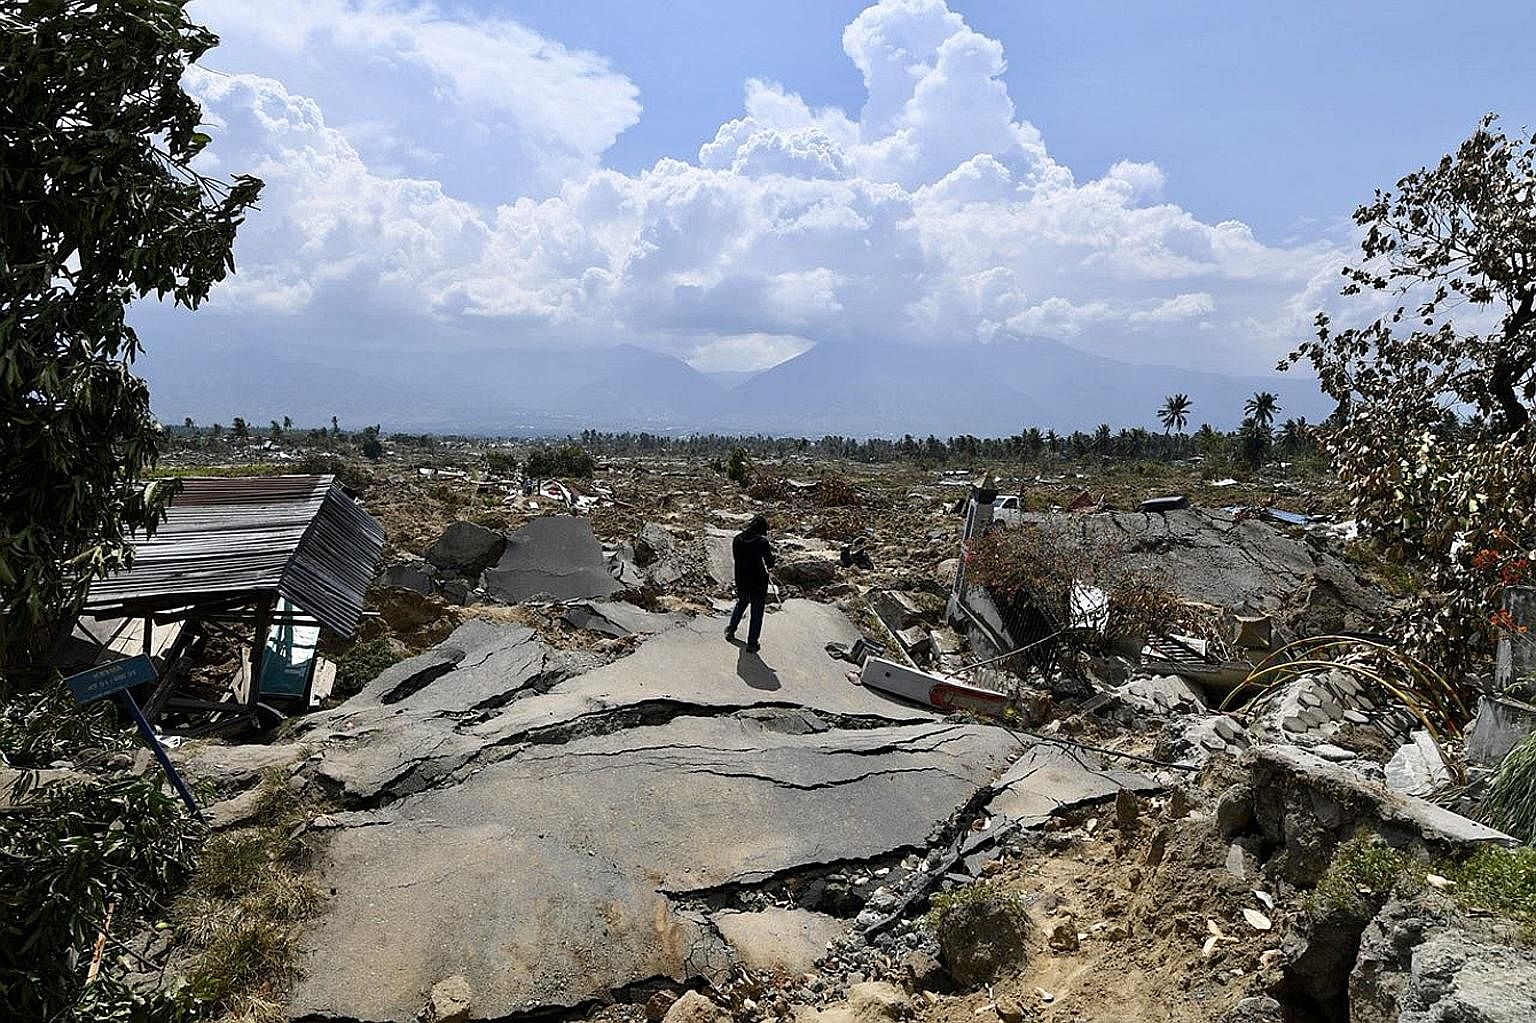 The village of Petobo, which lies 10km from Palu, Sulawesi, is now known as the "sunken village" after a 7.4-magnitude quake hit the west coast of the Indonesian island last Friday and triggered deadly tsunami waves. The 700 households in the village